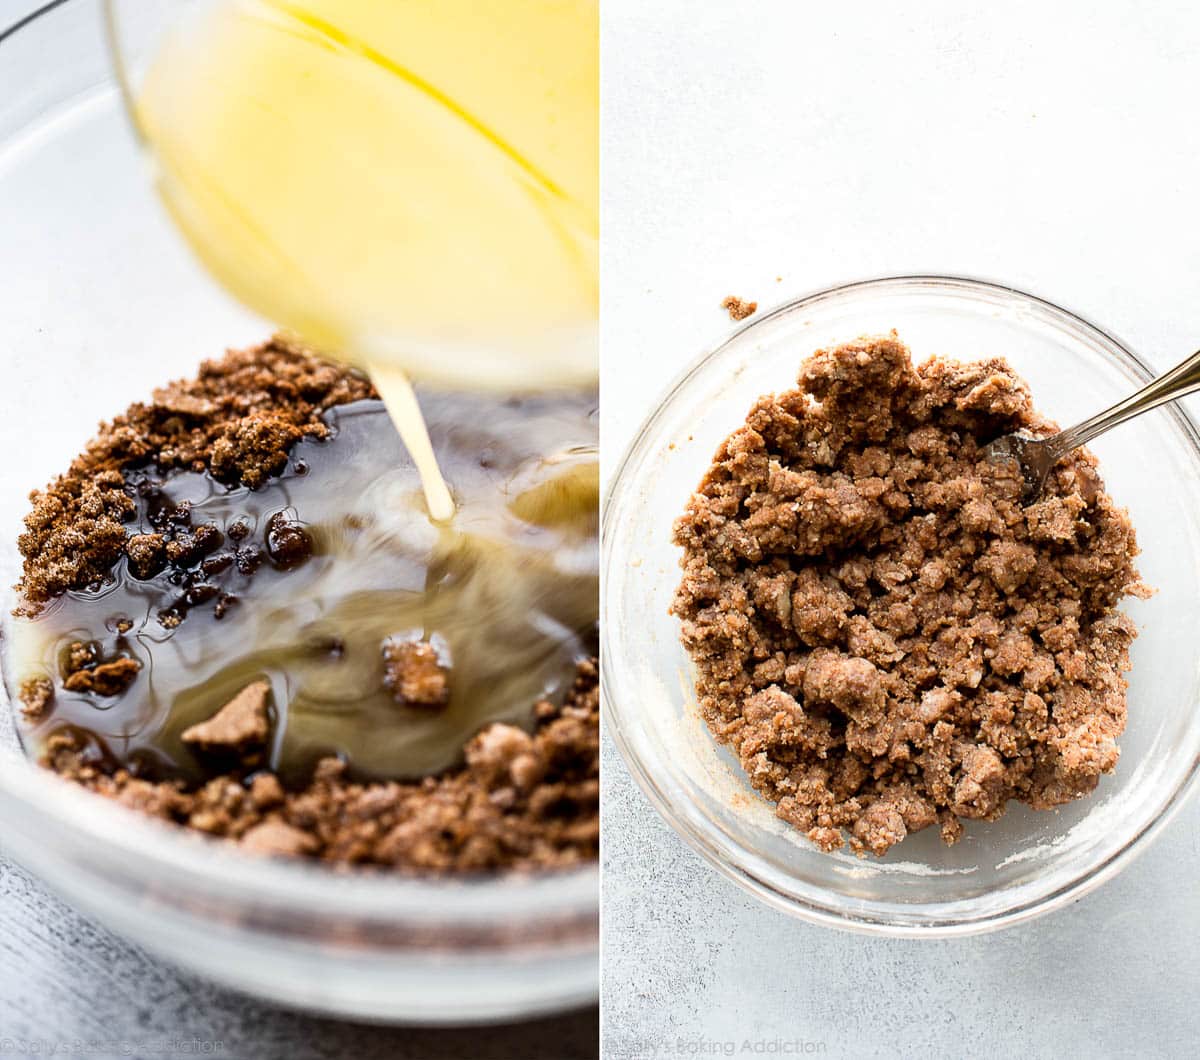 2 images of pouring butter into a glass bowl of crumb topping mixture and crumb topping mixture in a glass bowl